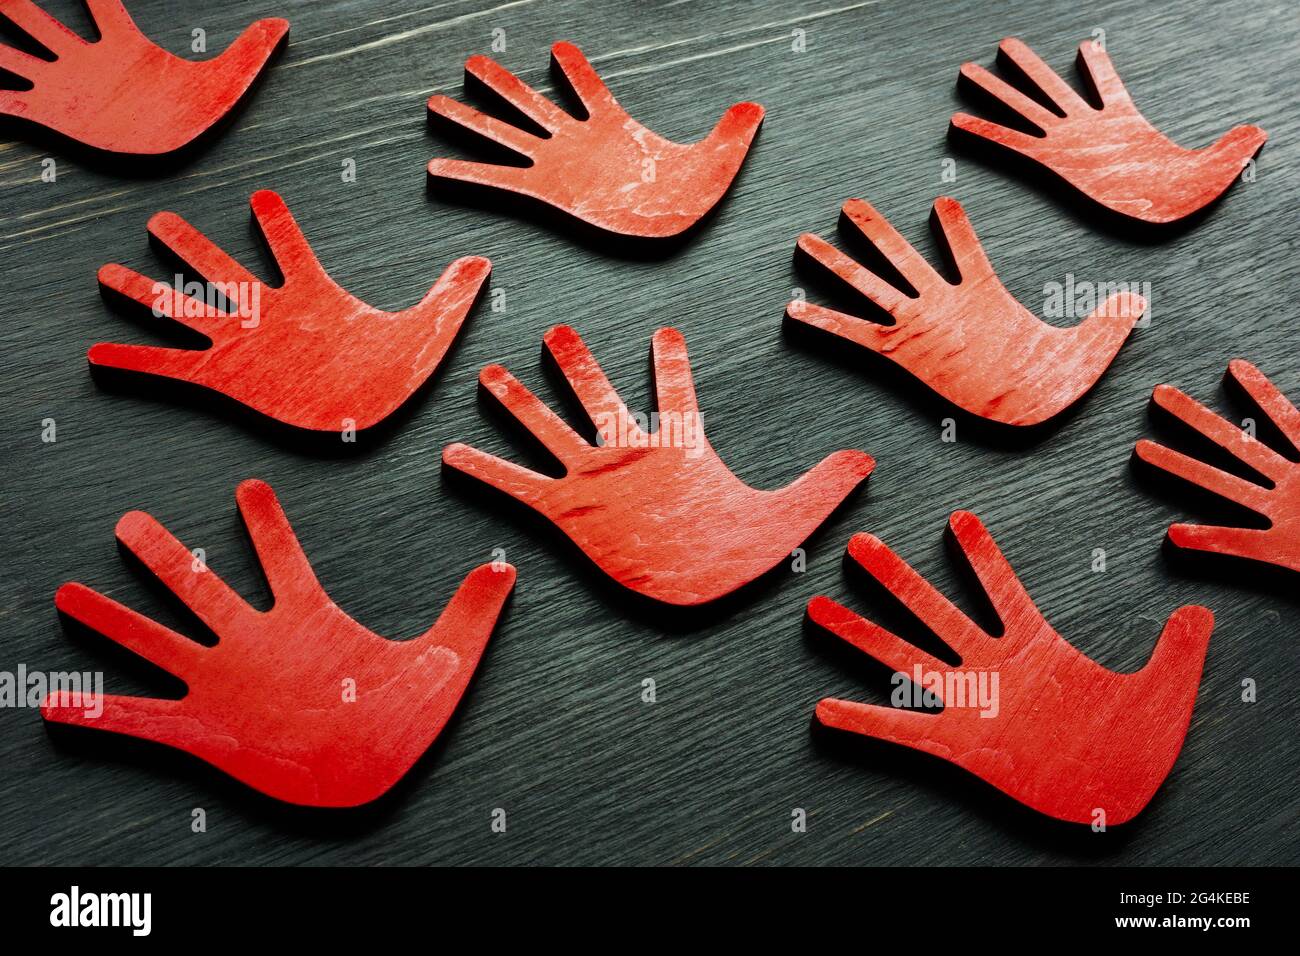 Red palms as a sign of protest or stop concept. Stock Photo